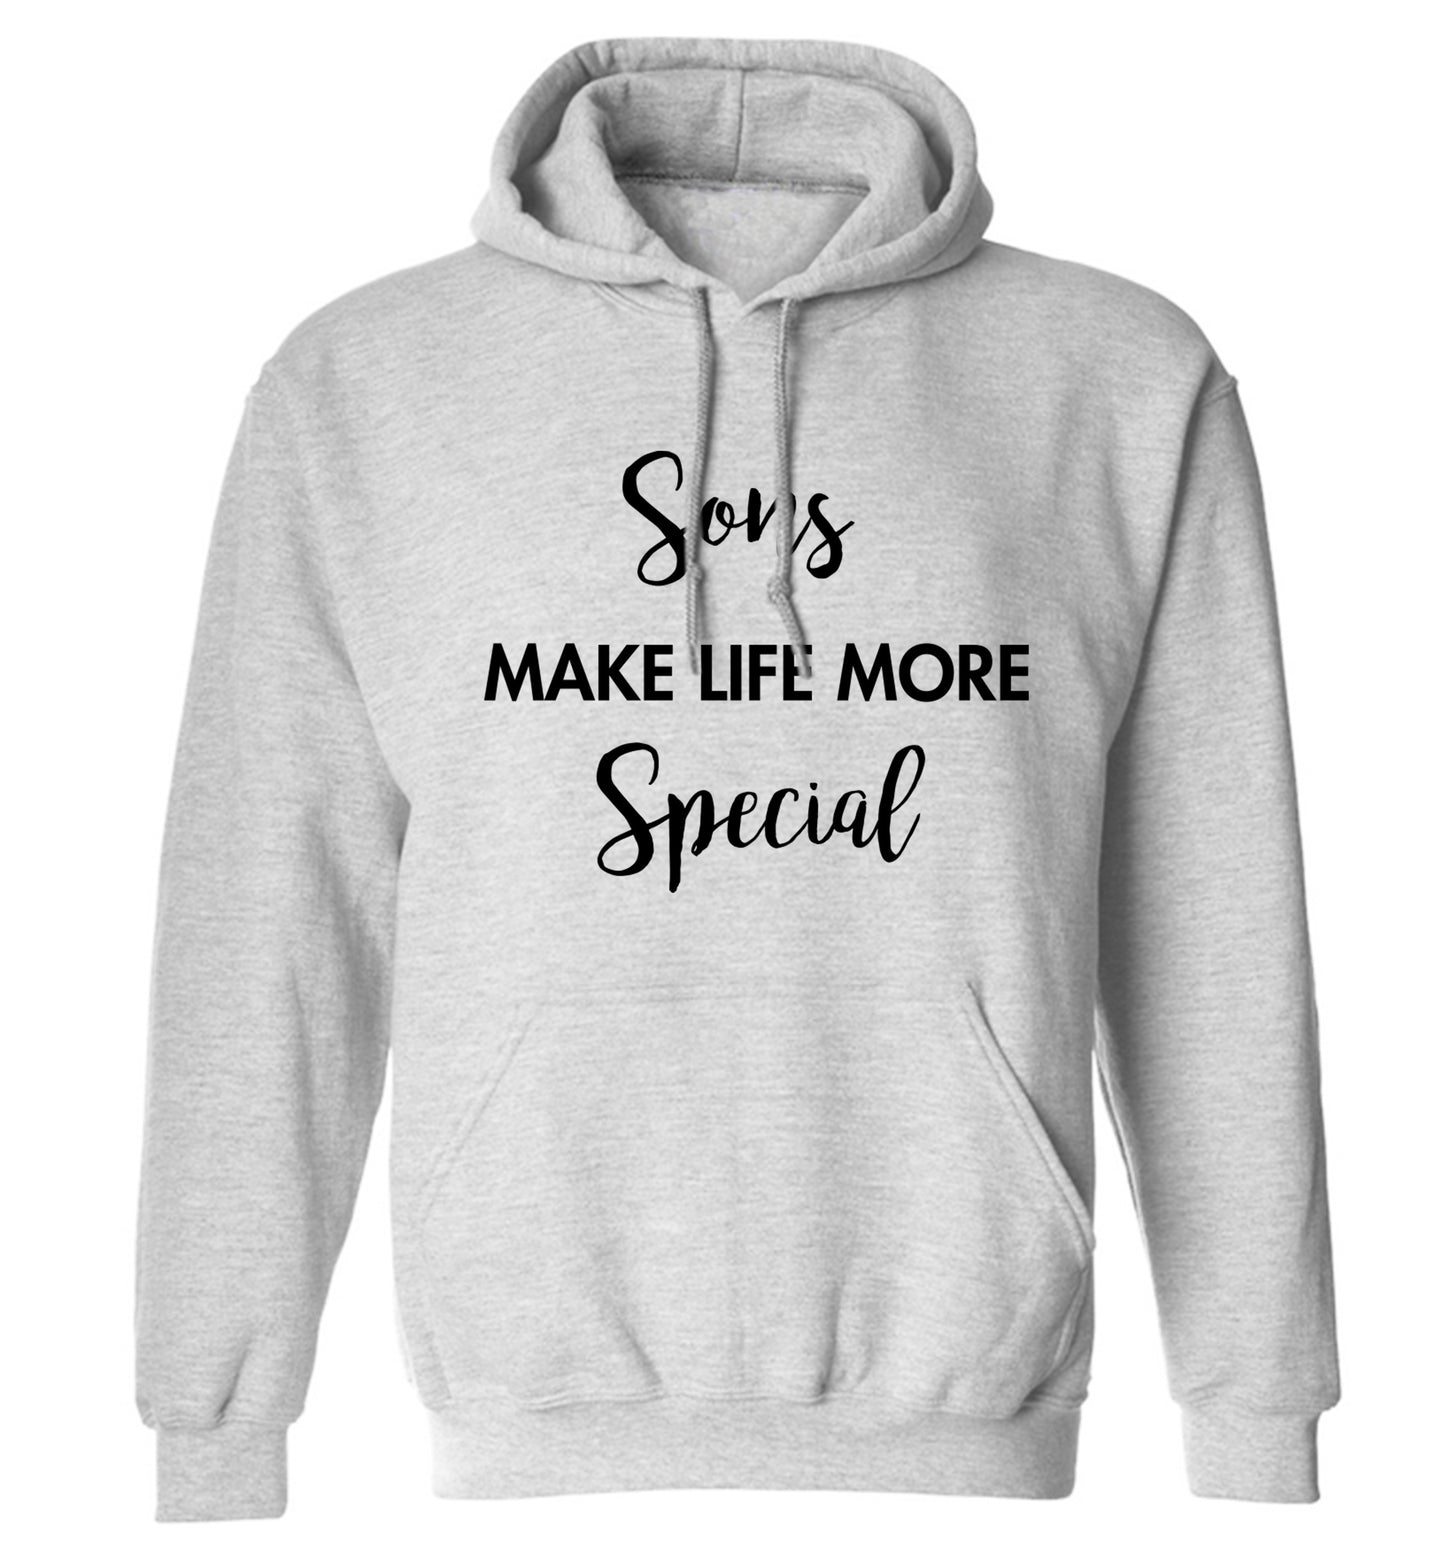 Daughters make life more special adults unisex grey hoodie 2XL